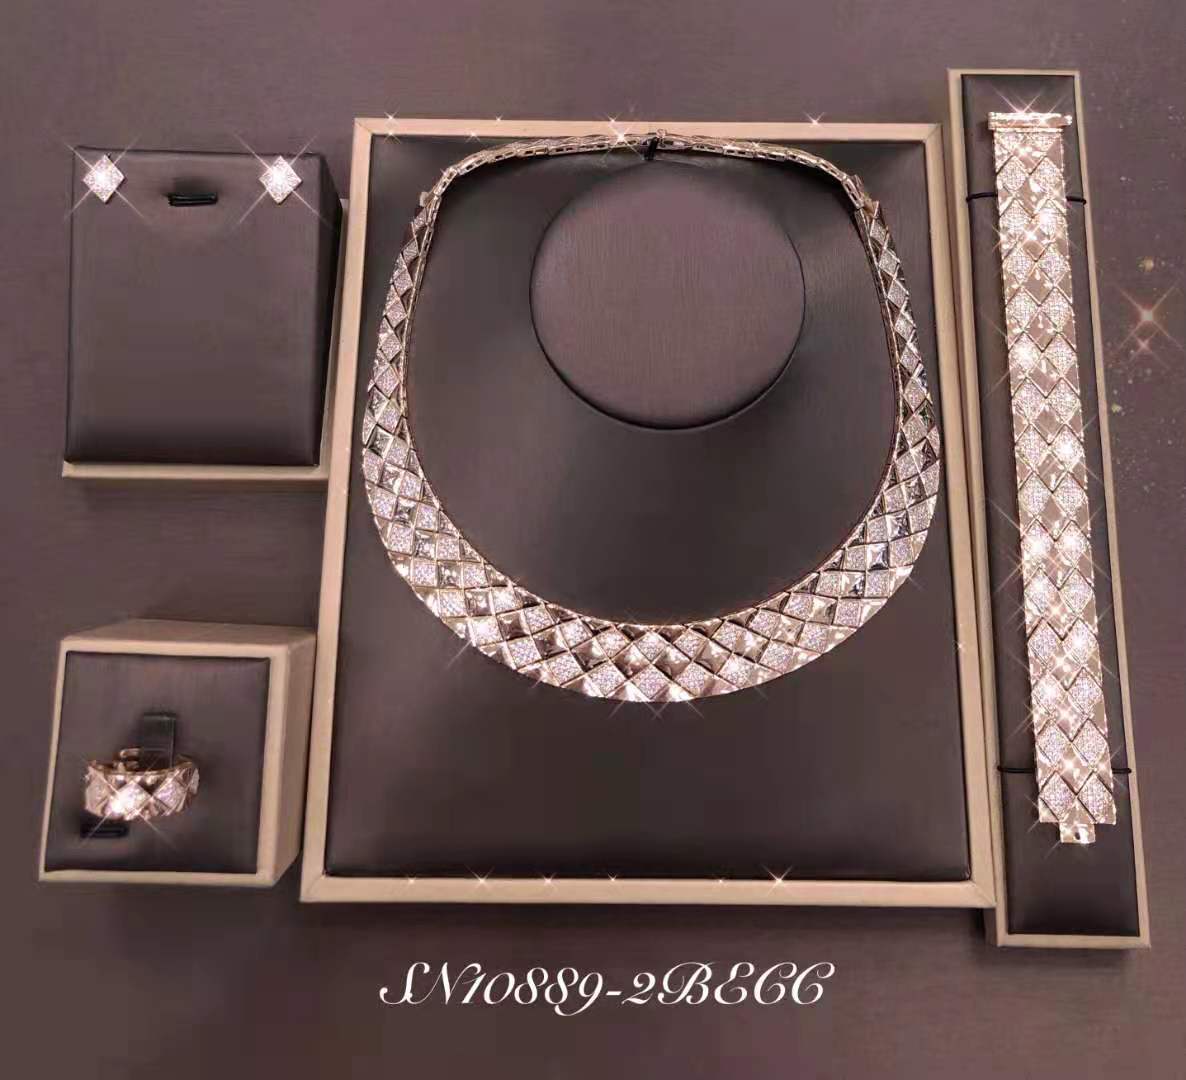 shop with crypto buy Accking 4pcs Bridal Zirconia Full Jewelry Sets For Women Party Luxury Dubai Nigeria CZ Crystal Wedding necklace sets pay with bitcoin